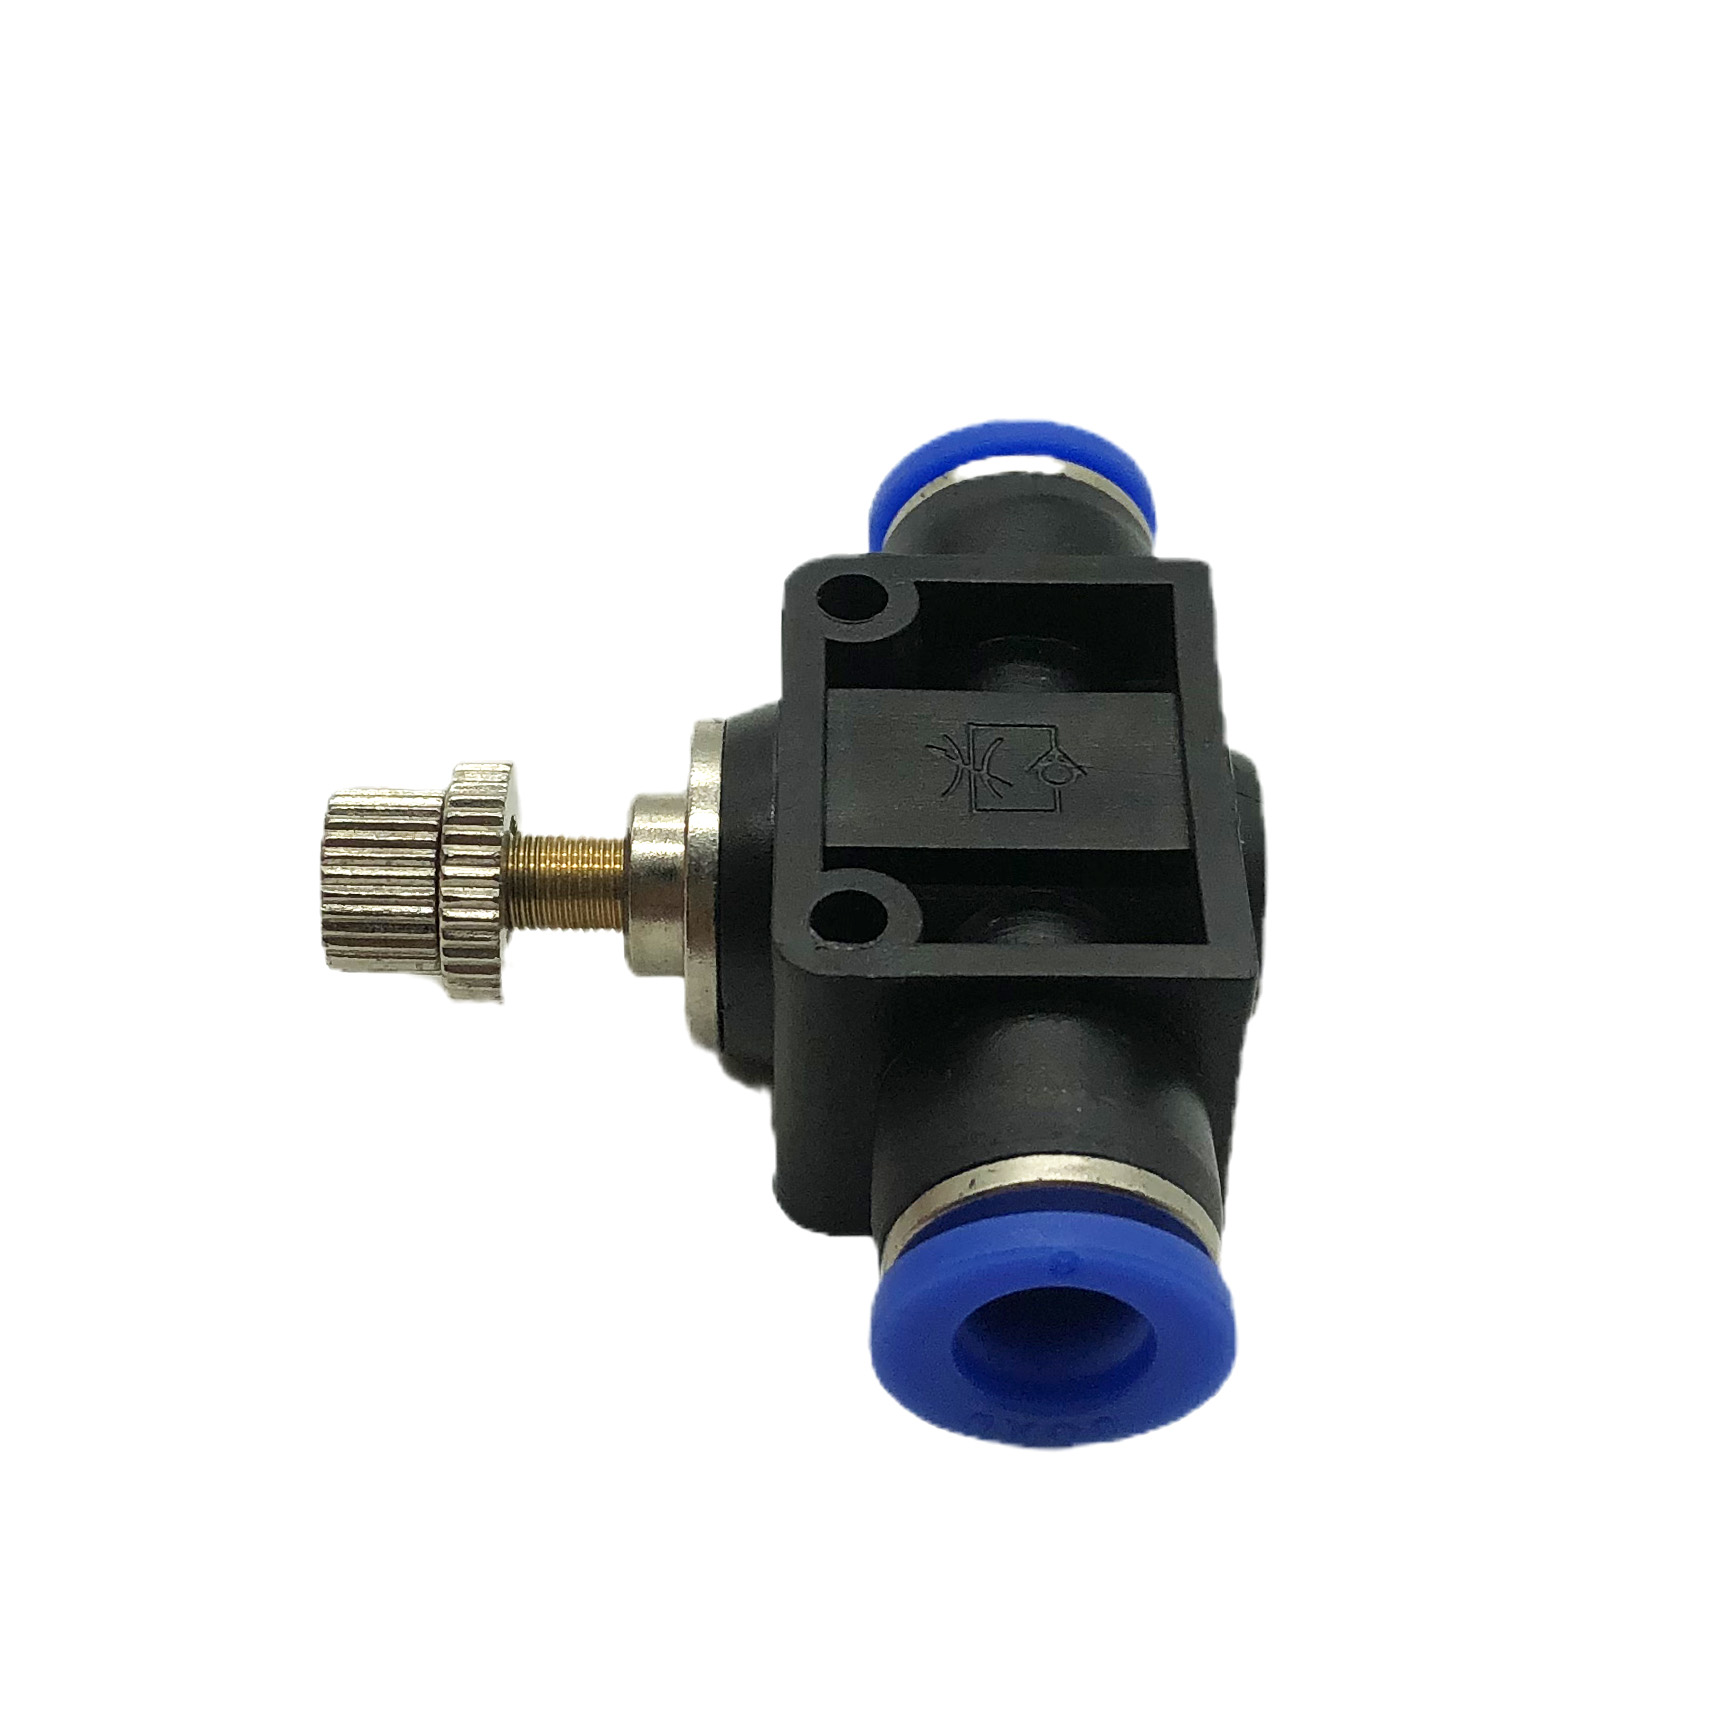 YUMO Pneumatic Gas Pipe Quick Insertion Quick Connector Pipeline Throttle Valve SA-8 Flow Adjustable Regulating Valve